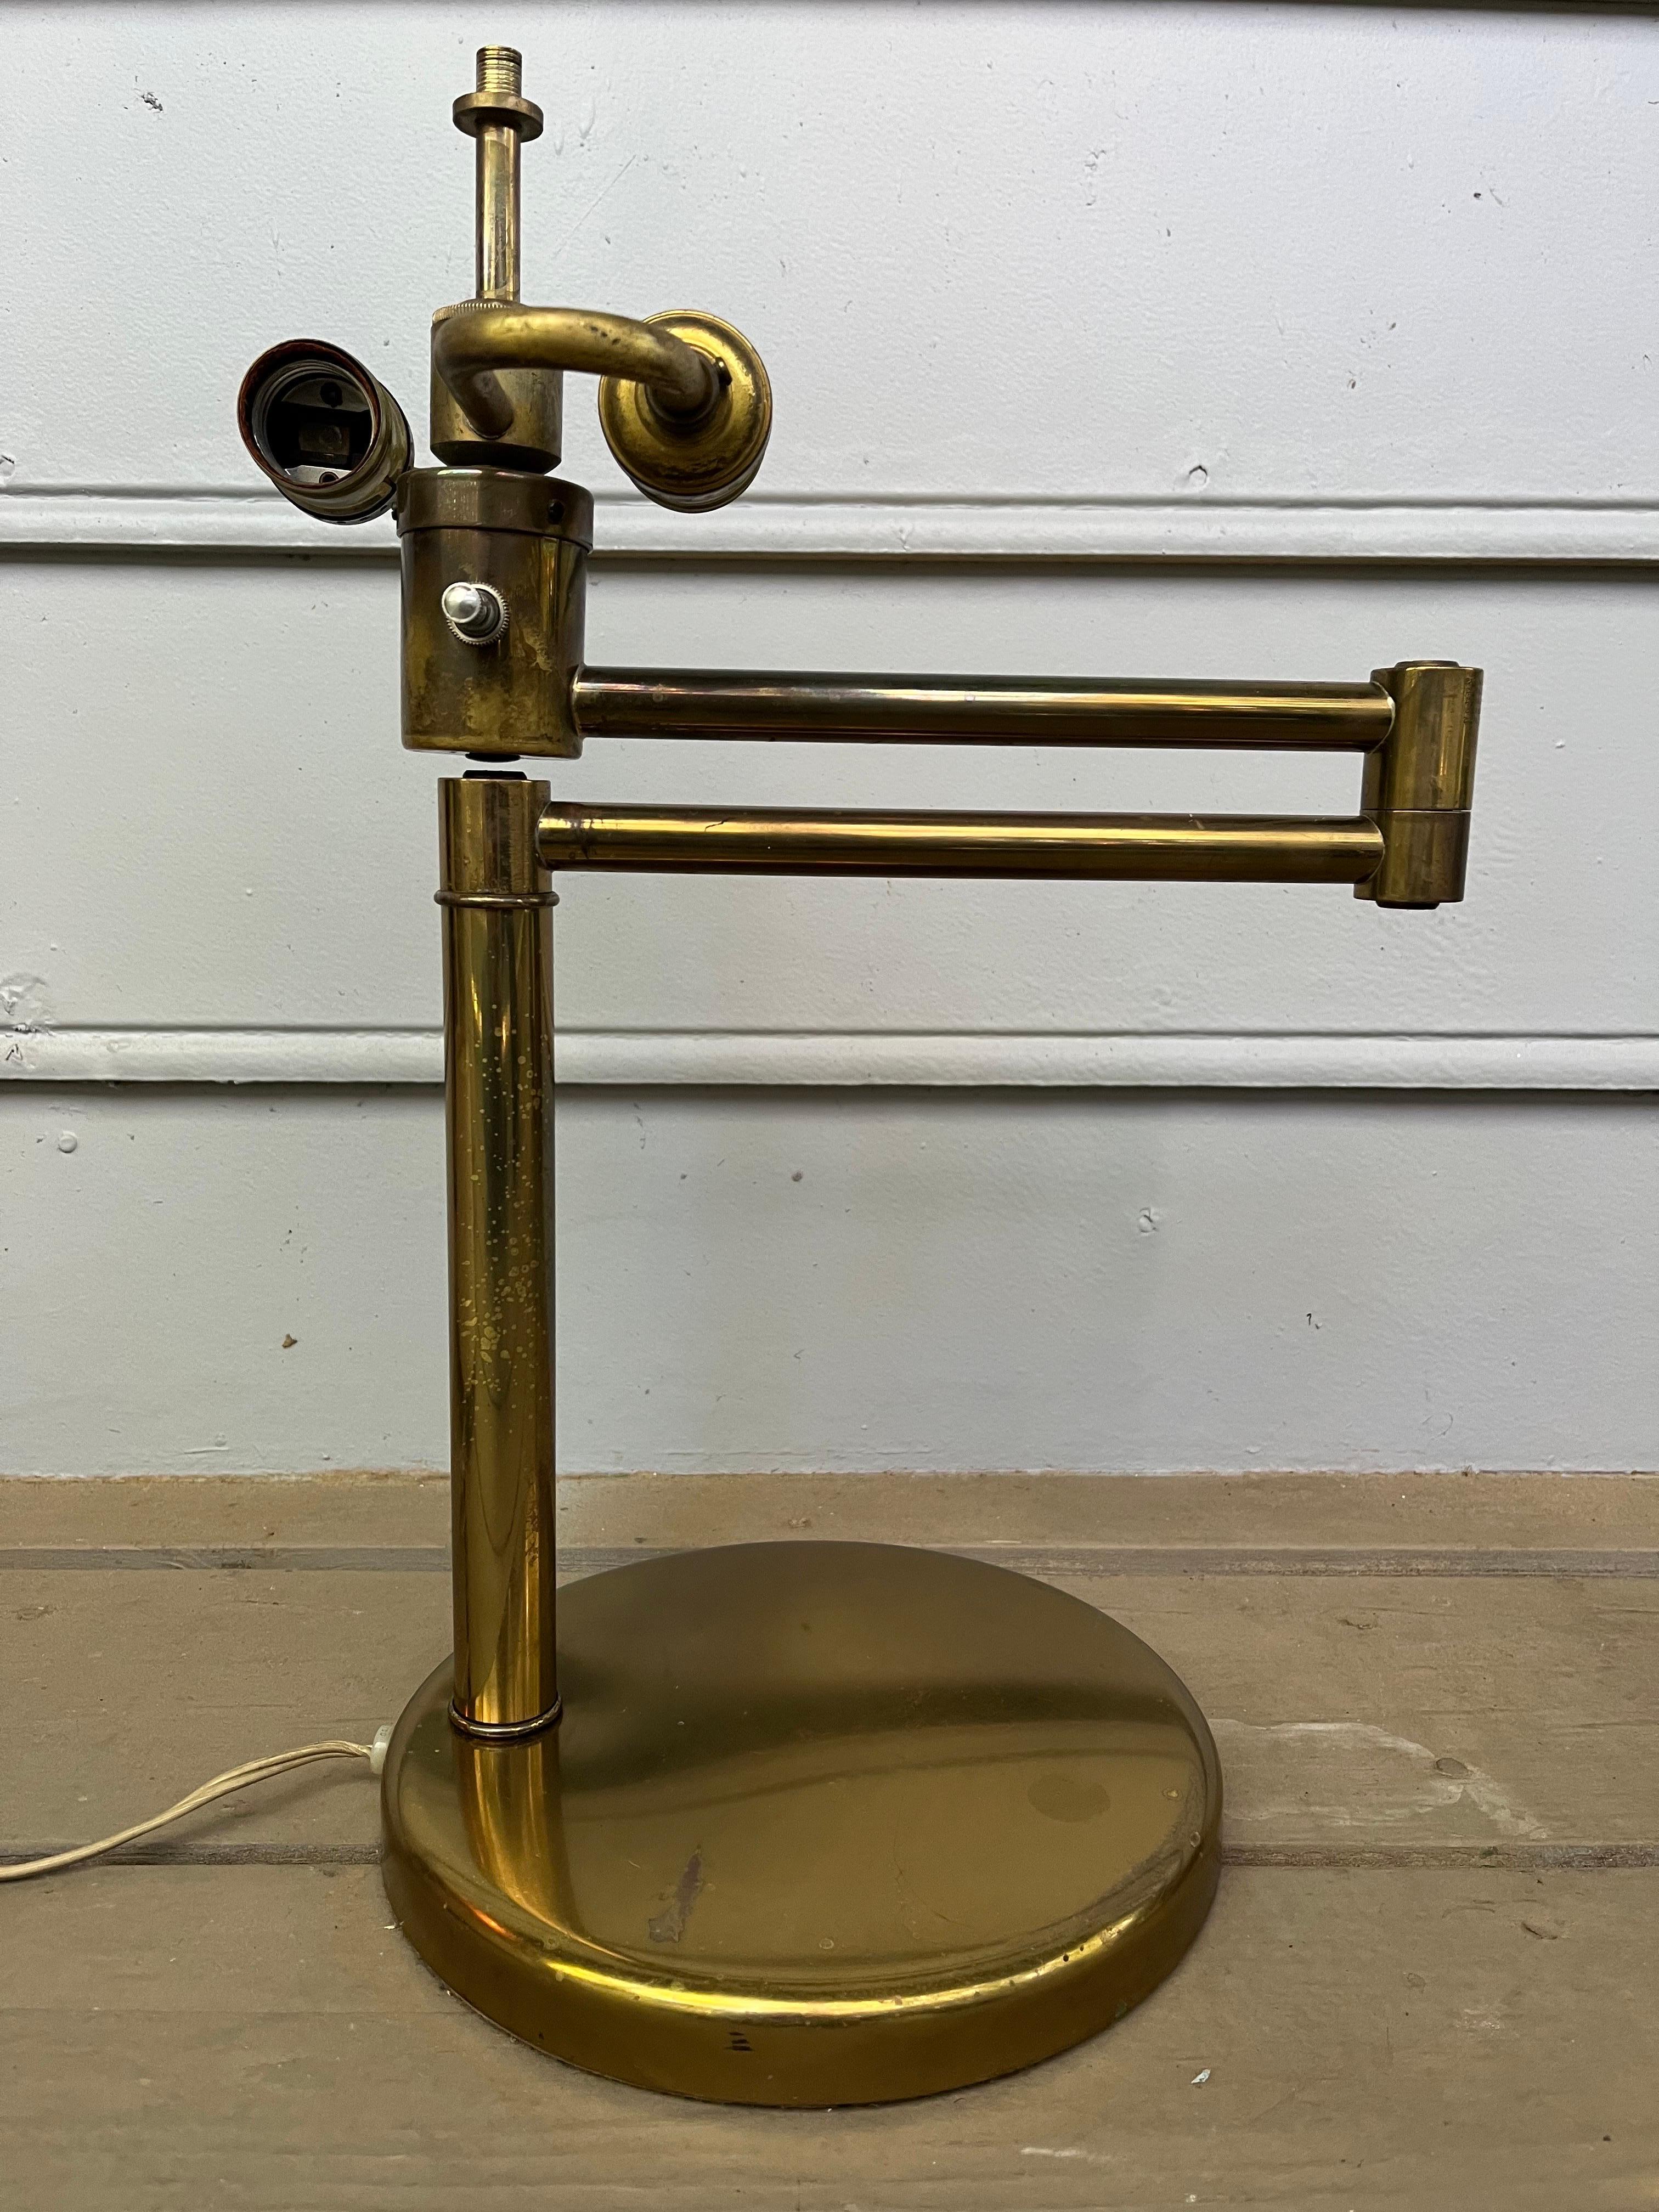 A vintage, mid century modern table or task lamp designed by Walter Von Nessen in the 1930's and produced in New York City sometime in the 1950's or 1960's by Nessen Lighting. This is the brass version with linen shade and white painted metal